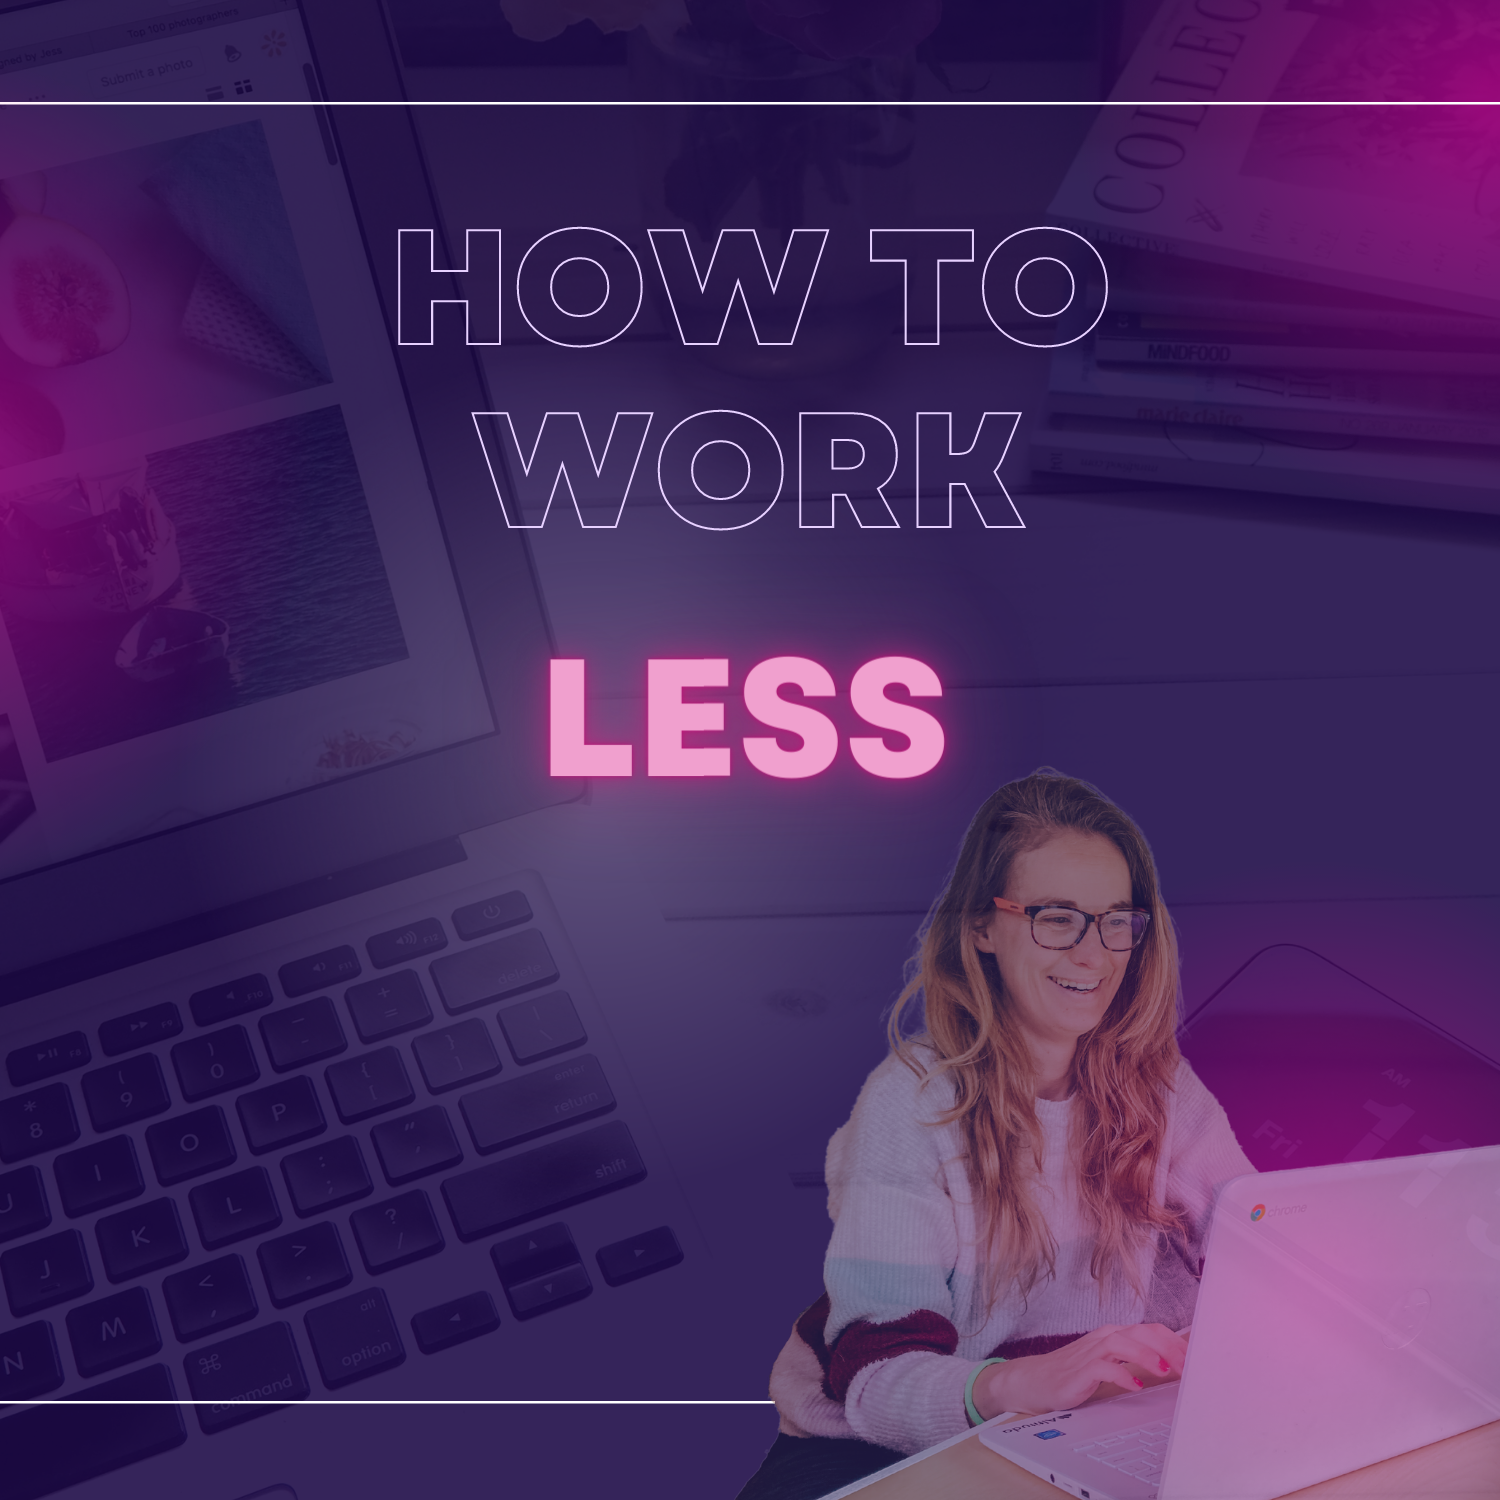 How to work less